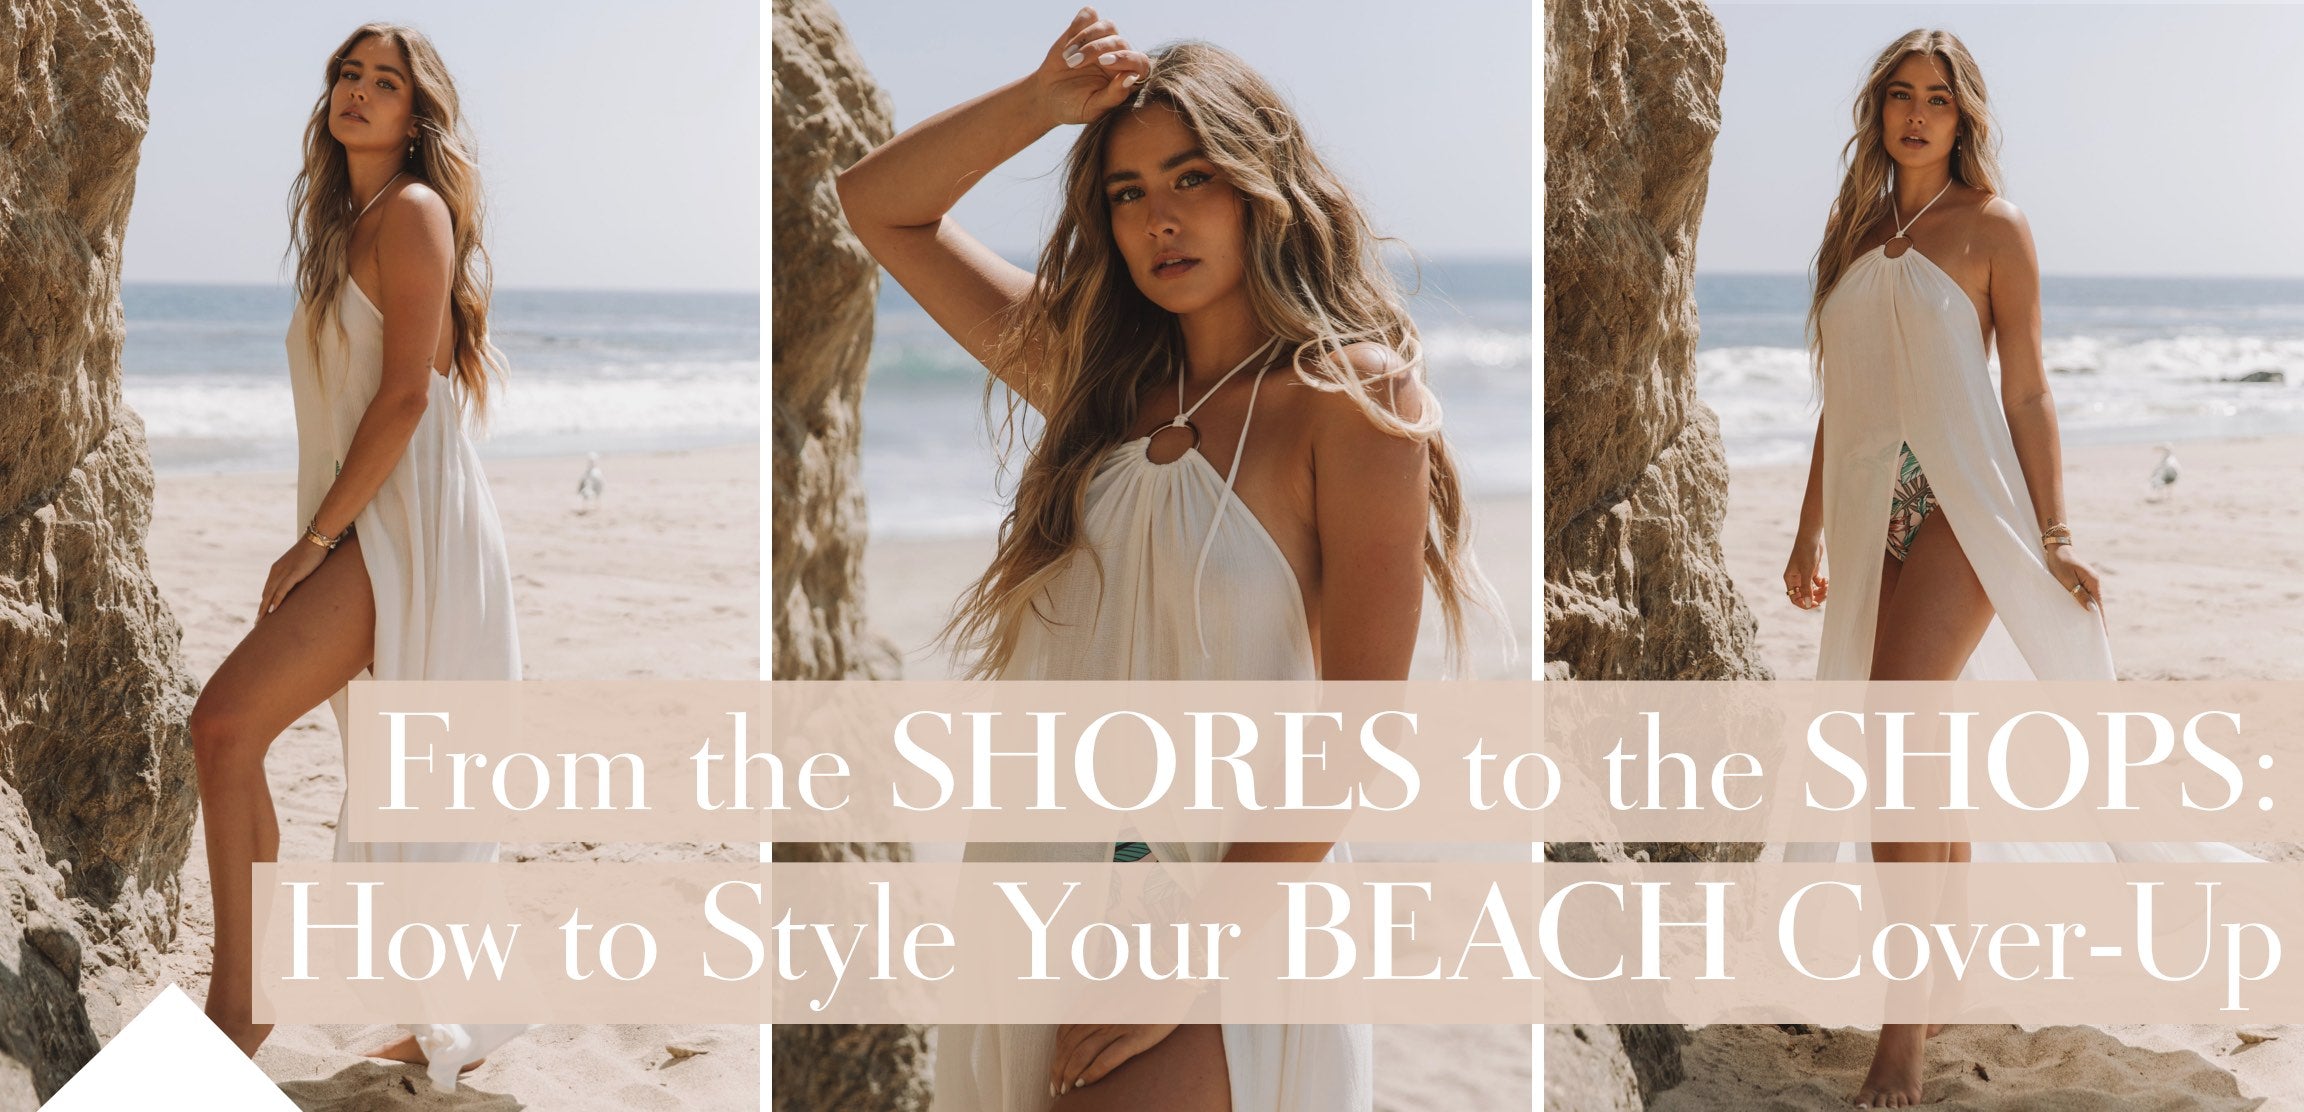 From the SHORES to the SHOPS: How to Style your BEACH Cover-up – VICI